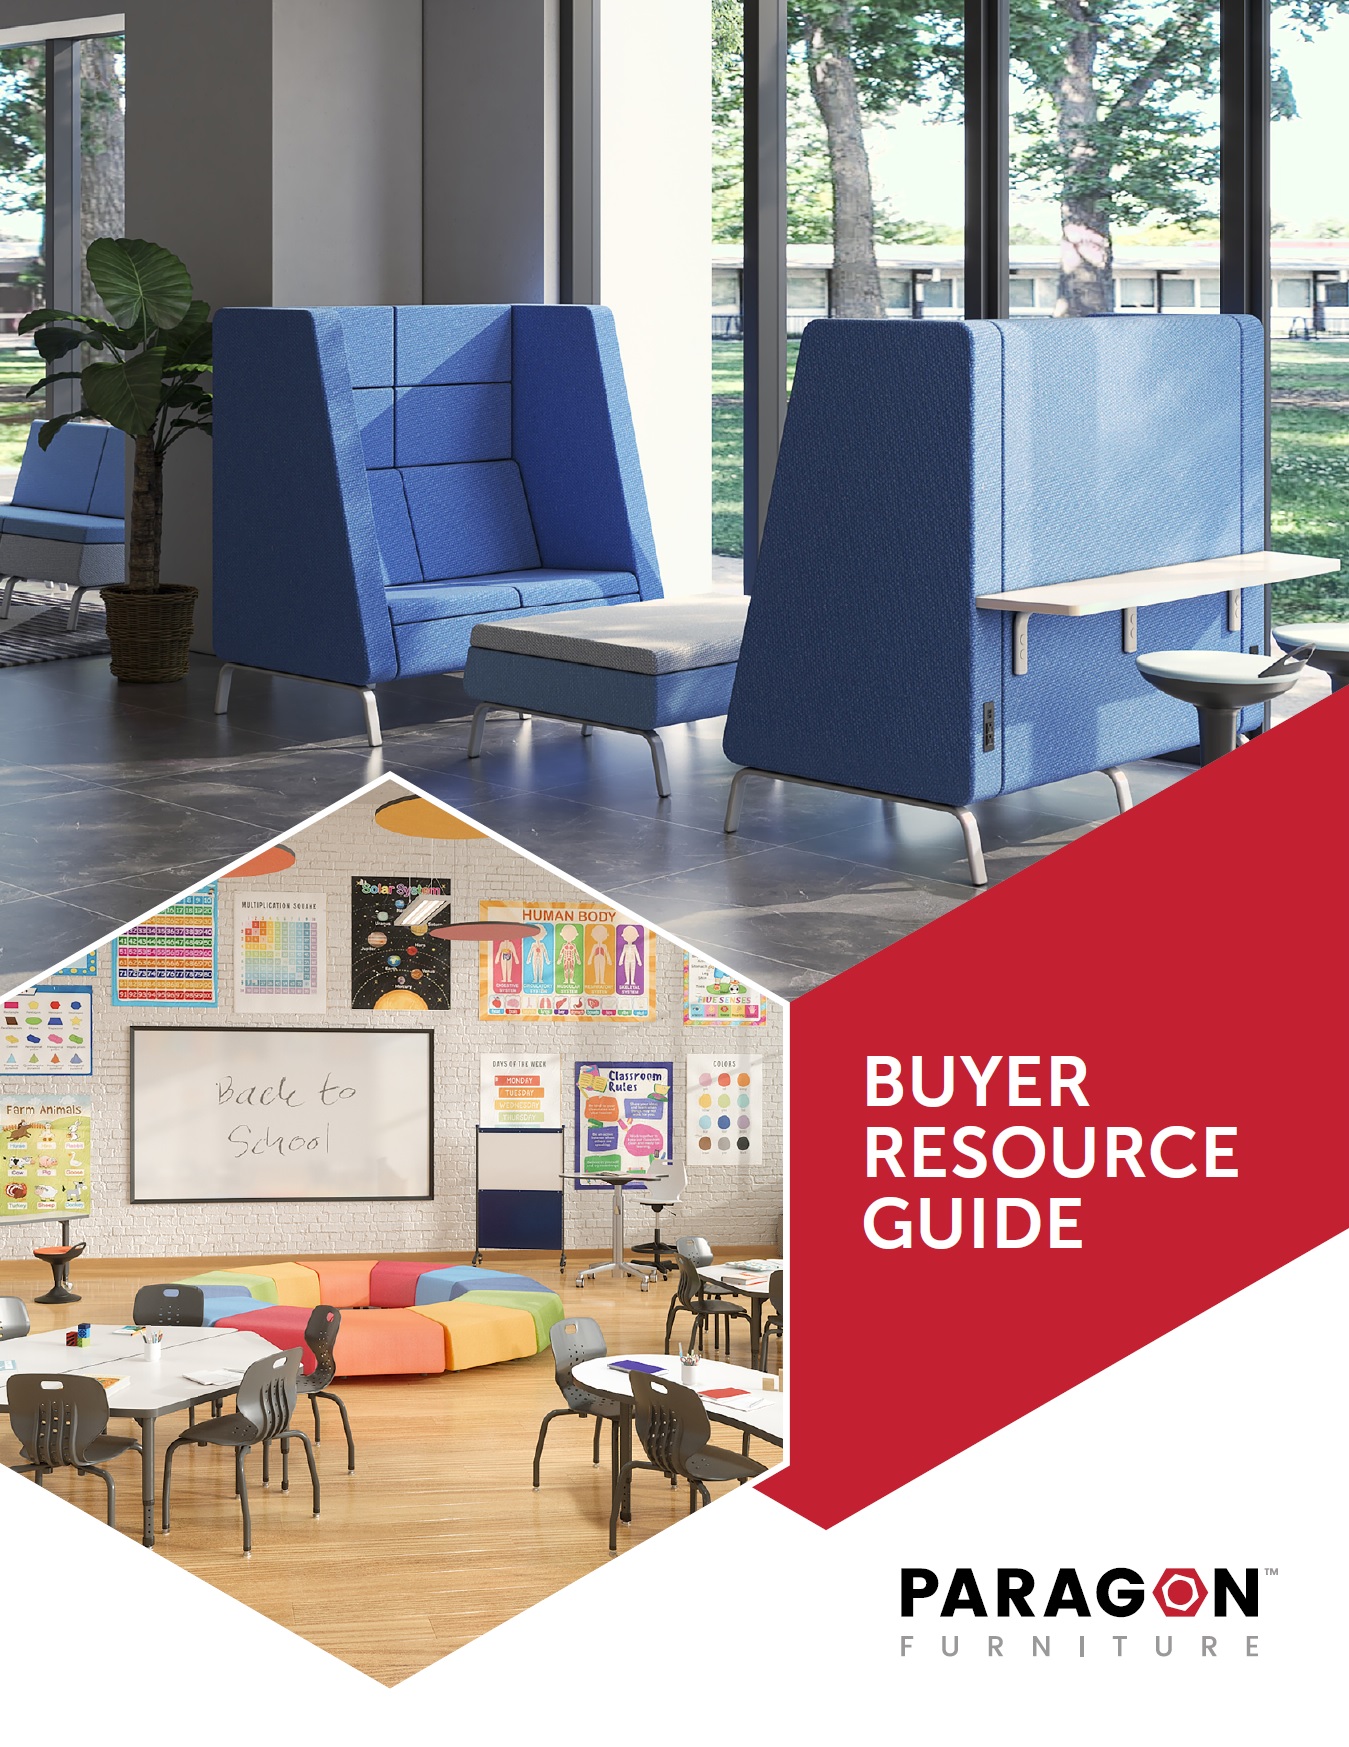 BUYER RESOURCE GUIDE - PARAGON FURNITURE - V5